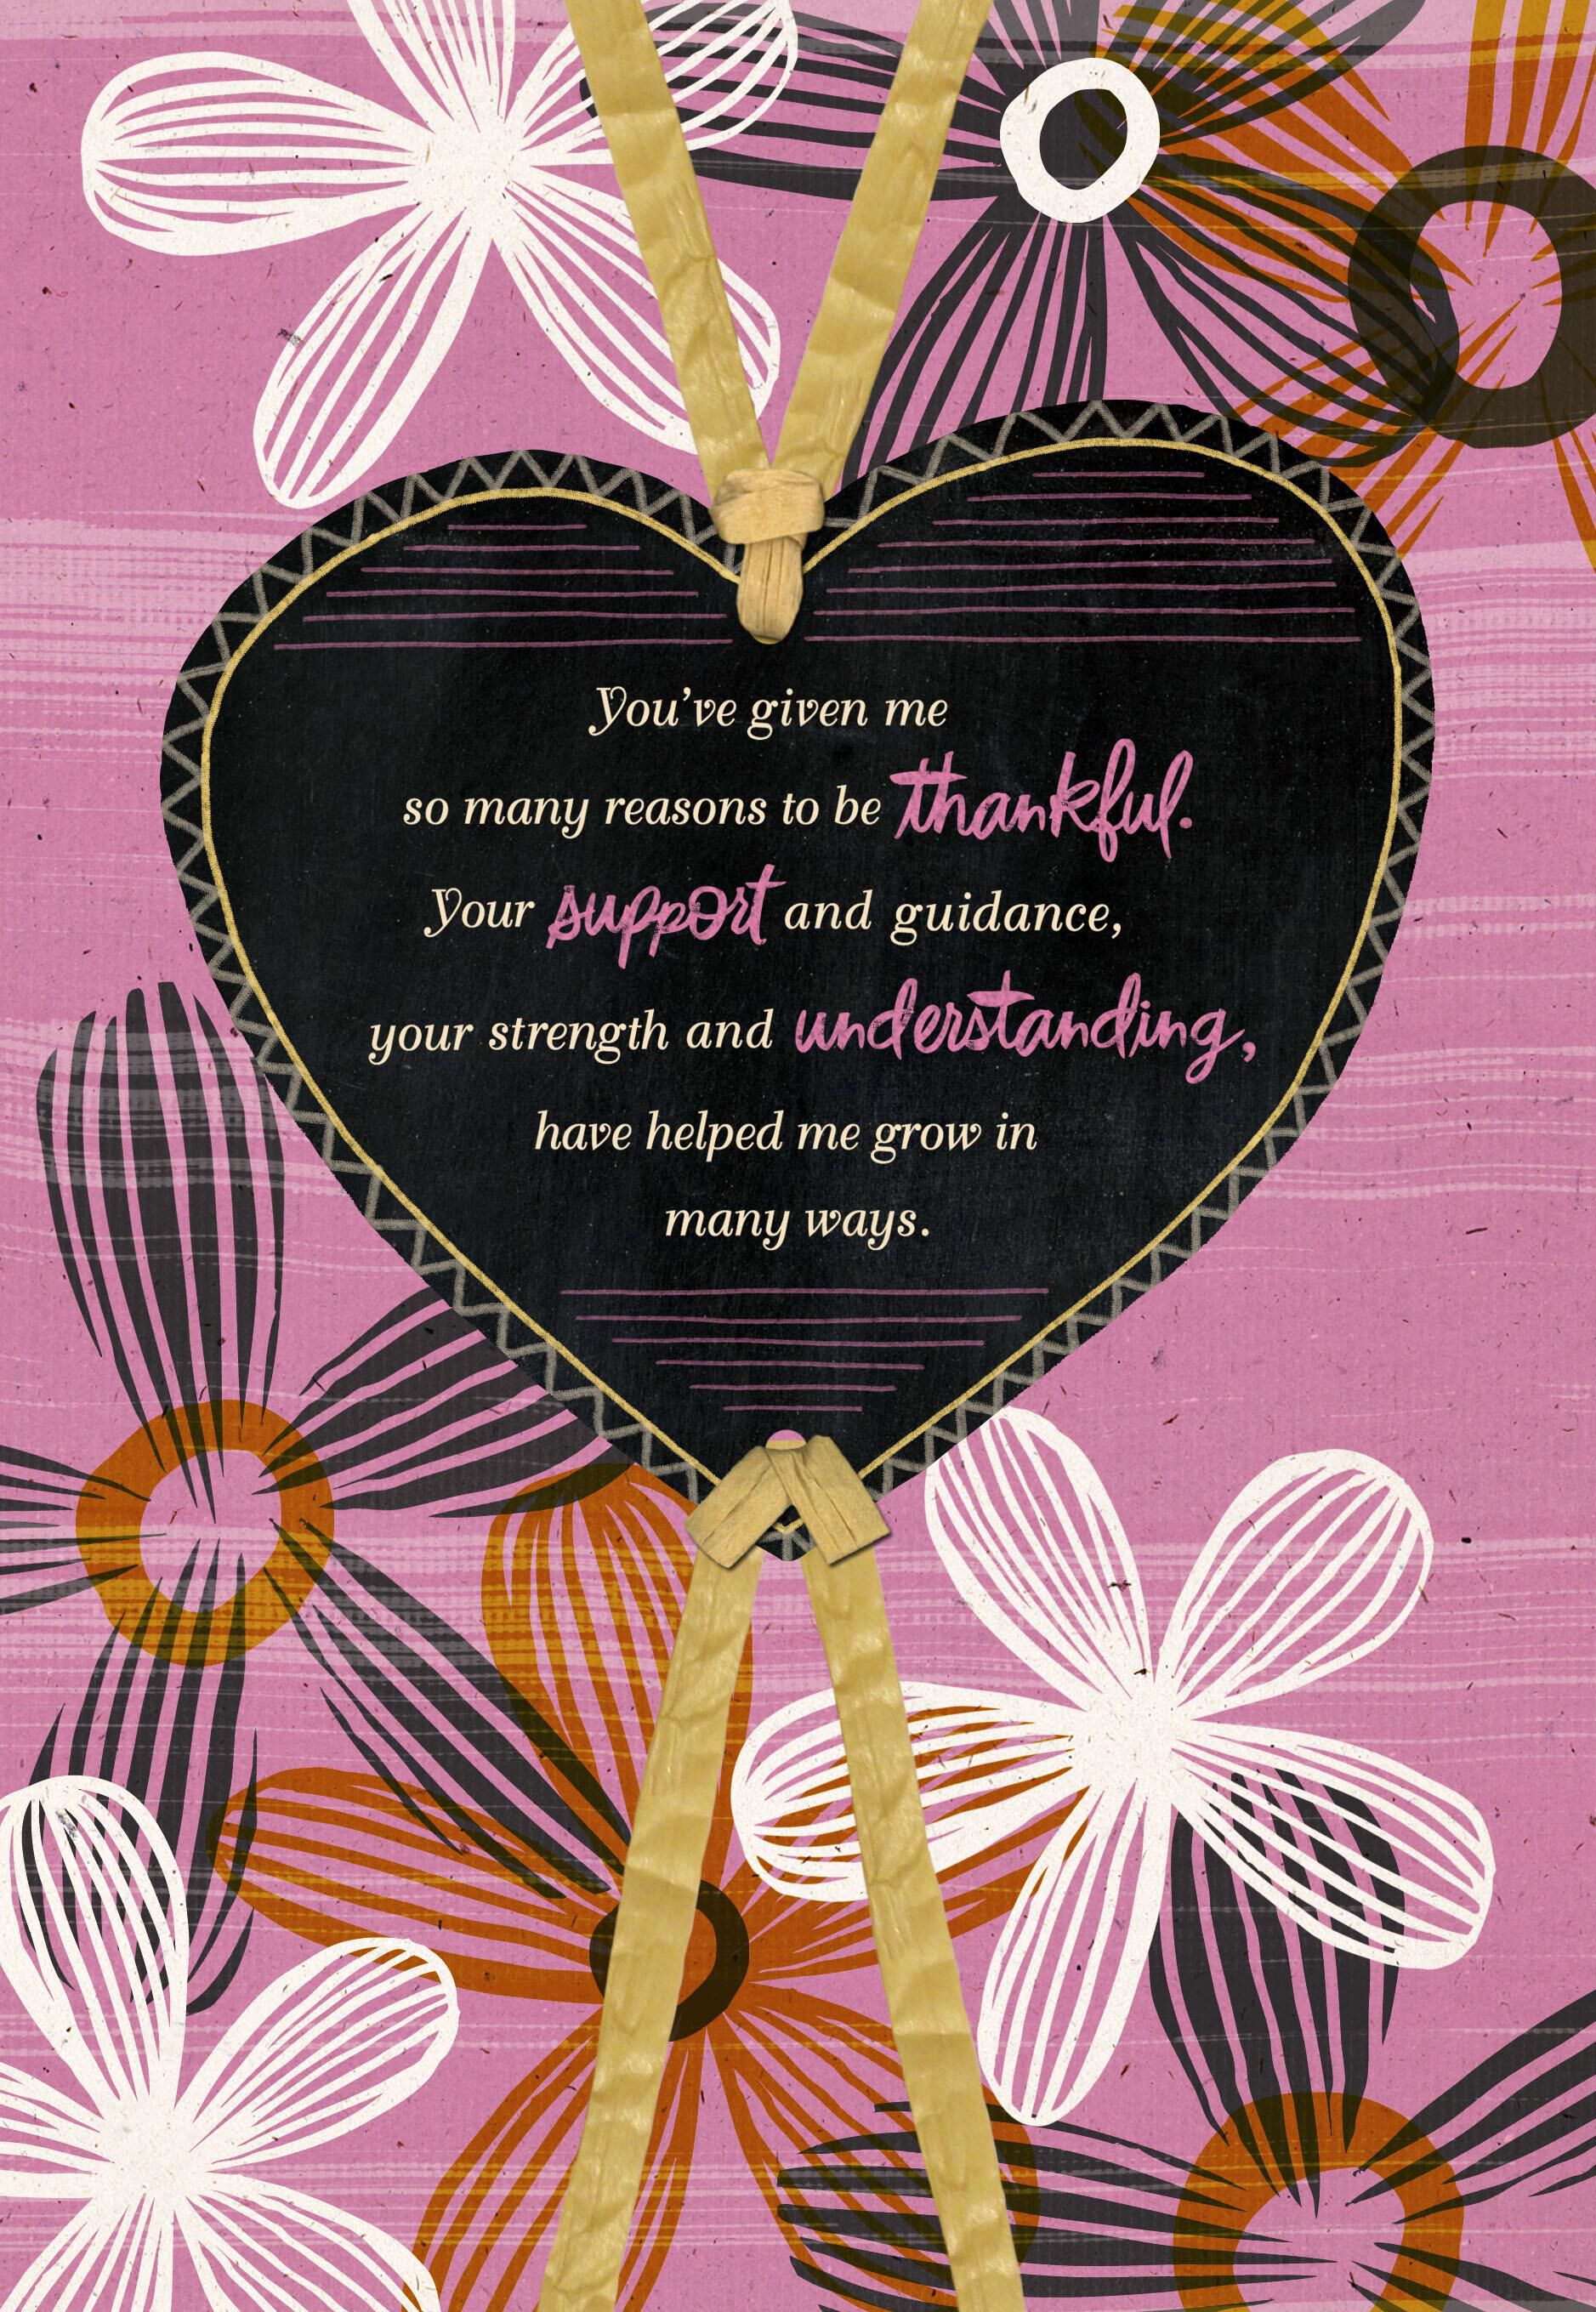 heart-and-flowers-mother-s-day-card-greeting-cards-hallmark